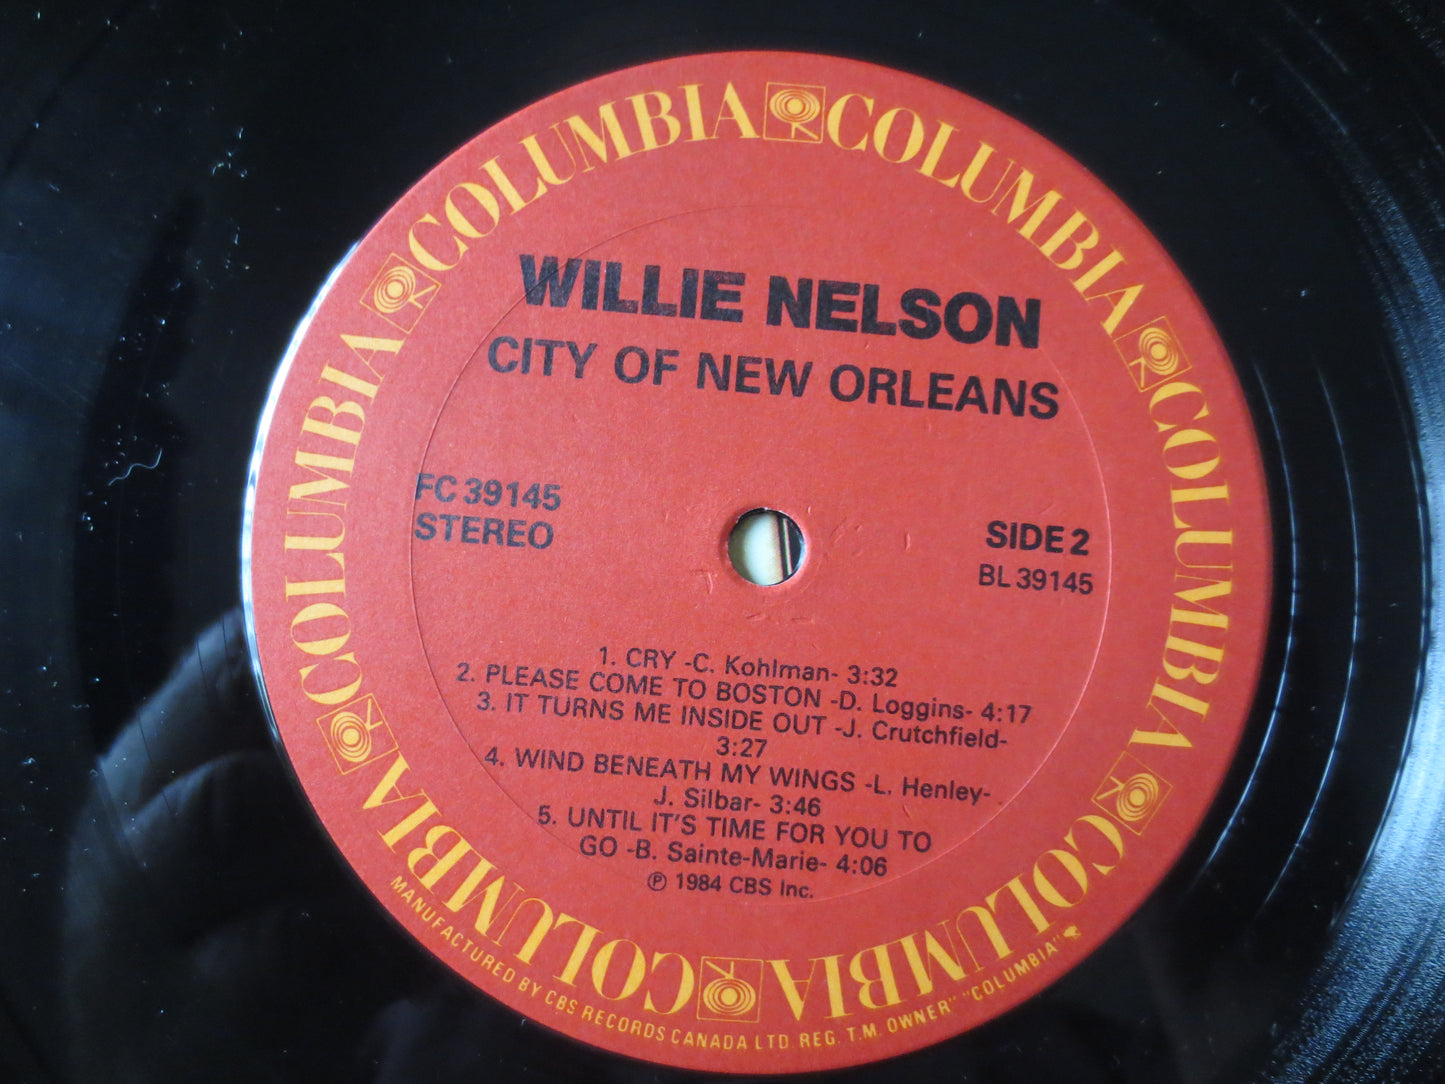 WILLIE NELSON, City of New Orleans, Willie Nelson Record, Country Records, Willie Nelson Album, Vinyl Records, 1984 Records